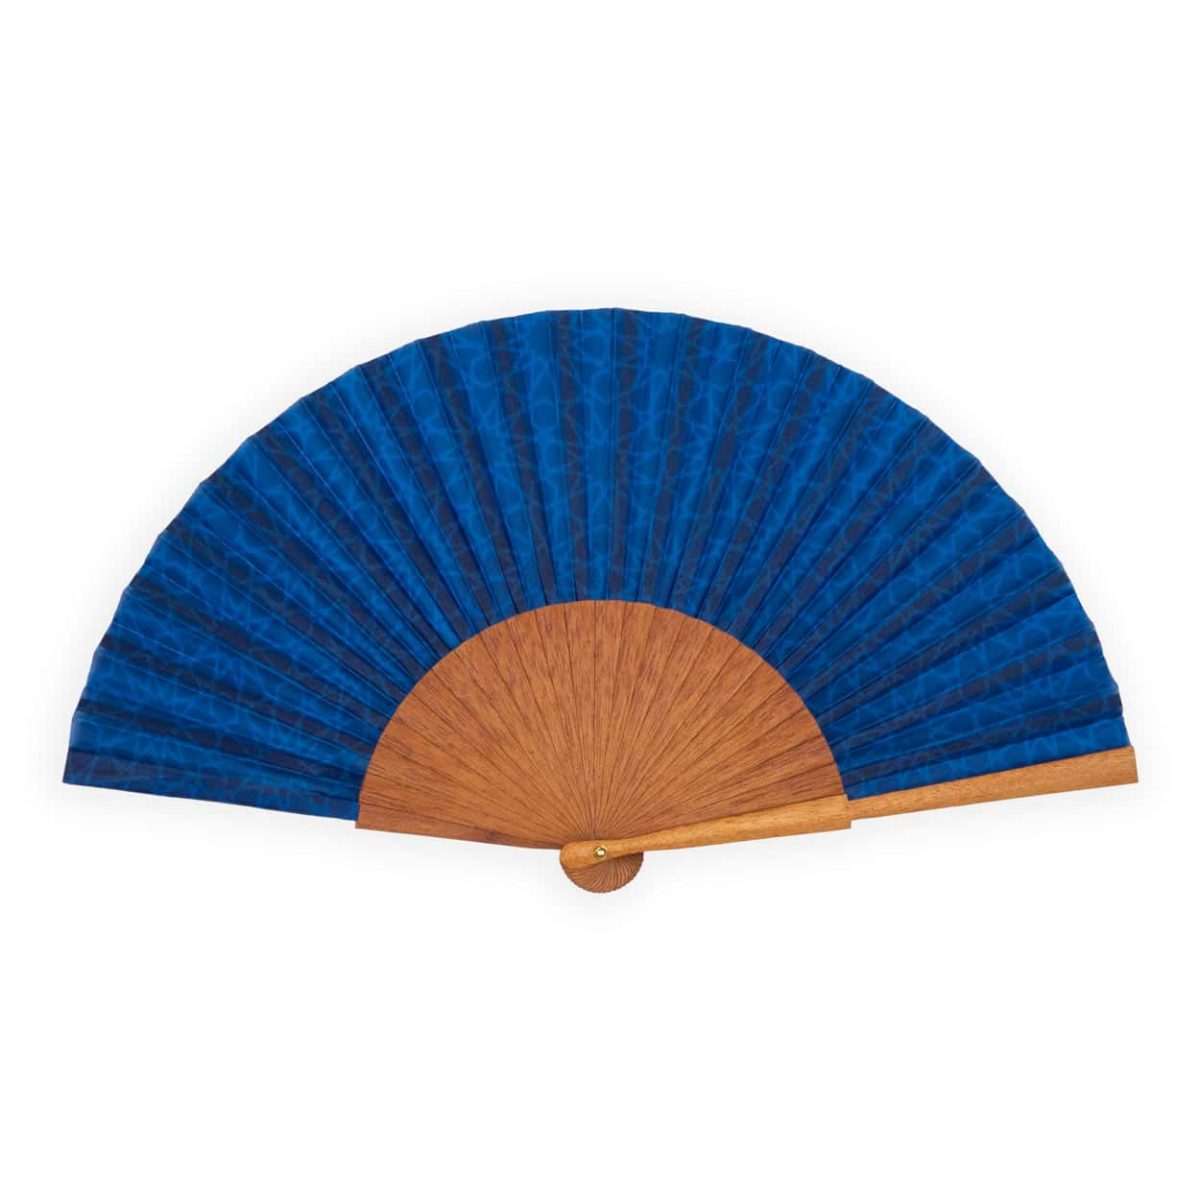 Silk and wood blue hand fan inspired by islamic art